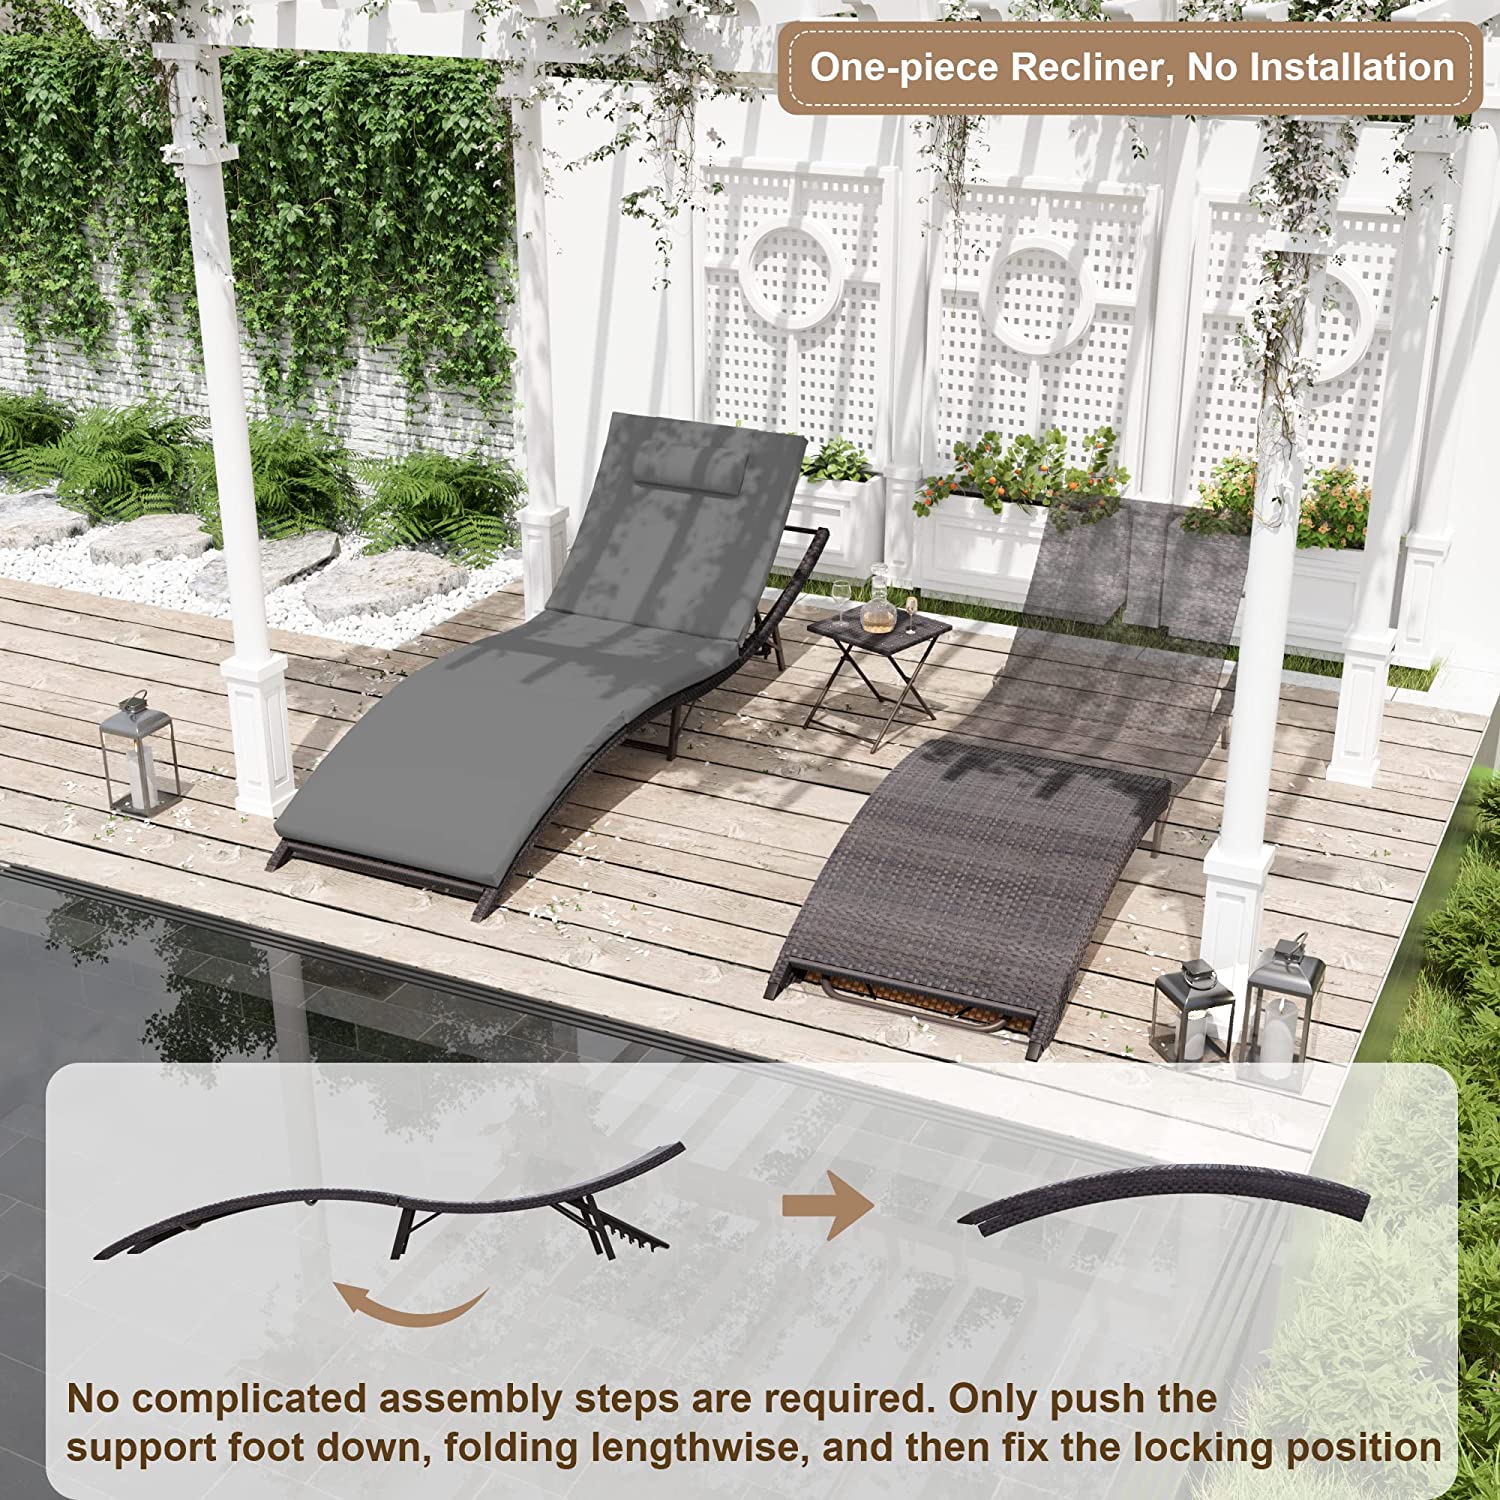 Kullavik Patio Chaise Lounge Set 3 Pieces Outdoor Lounge Chair Outdoor Wicker Lounge Chairs with Table Folding Chaise Lounger for Poolside Backyard Porch,Grey - image 5 of 7